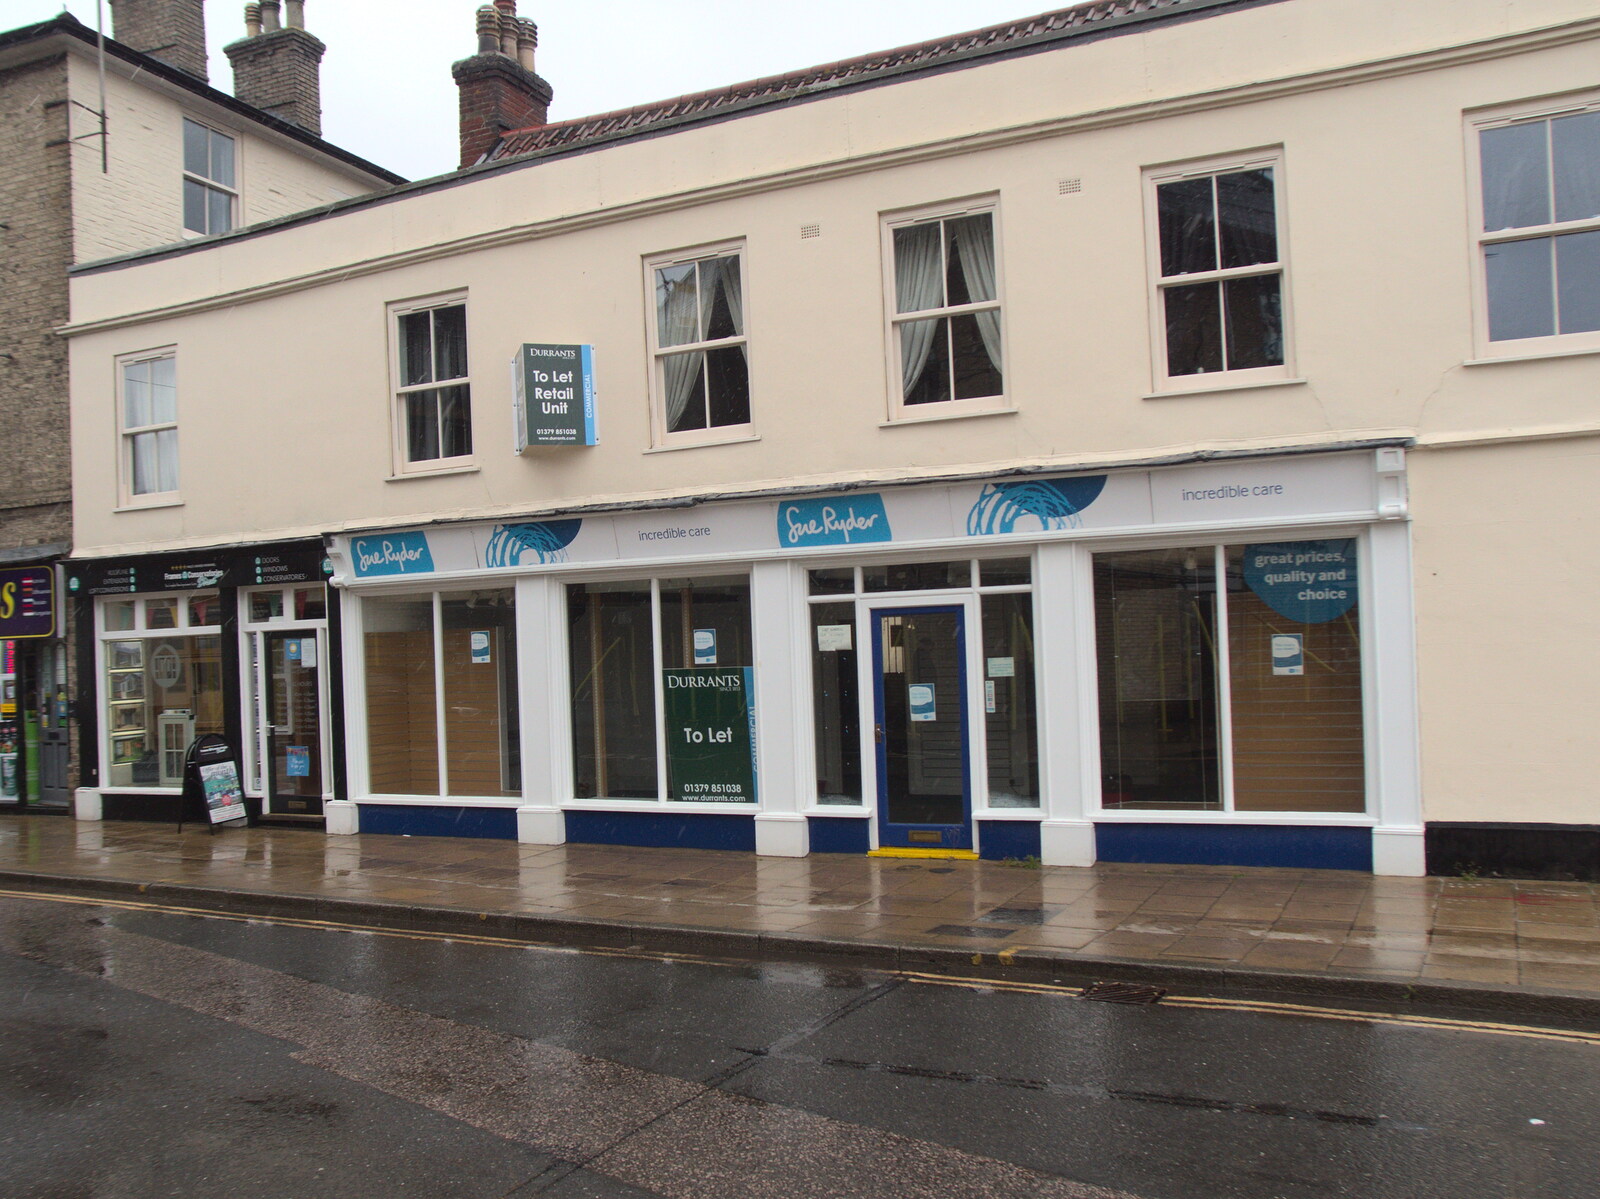 The Sue Ryder charity shop has packed it in from A Vaccination Afternoon, Swaffham, Norfolk - 9th May 2021